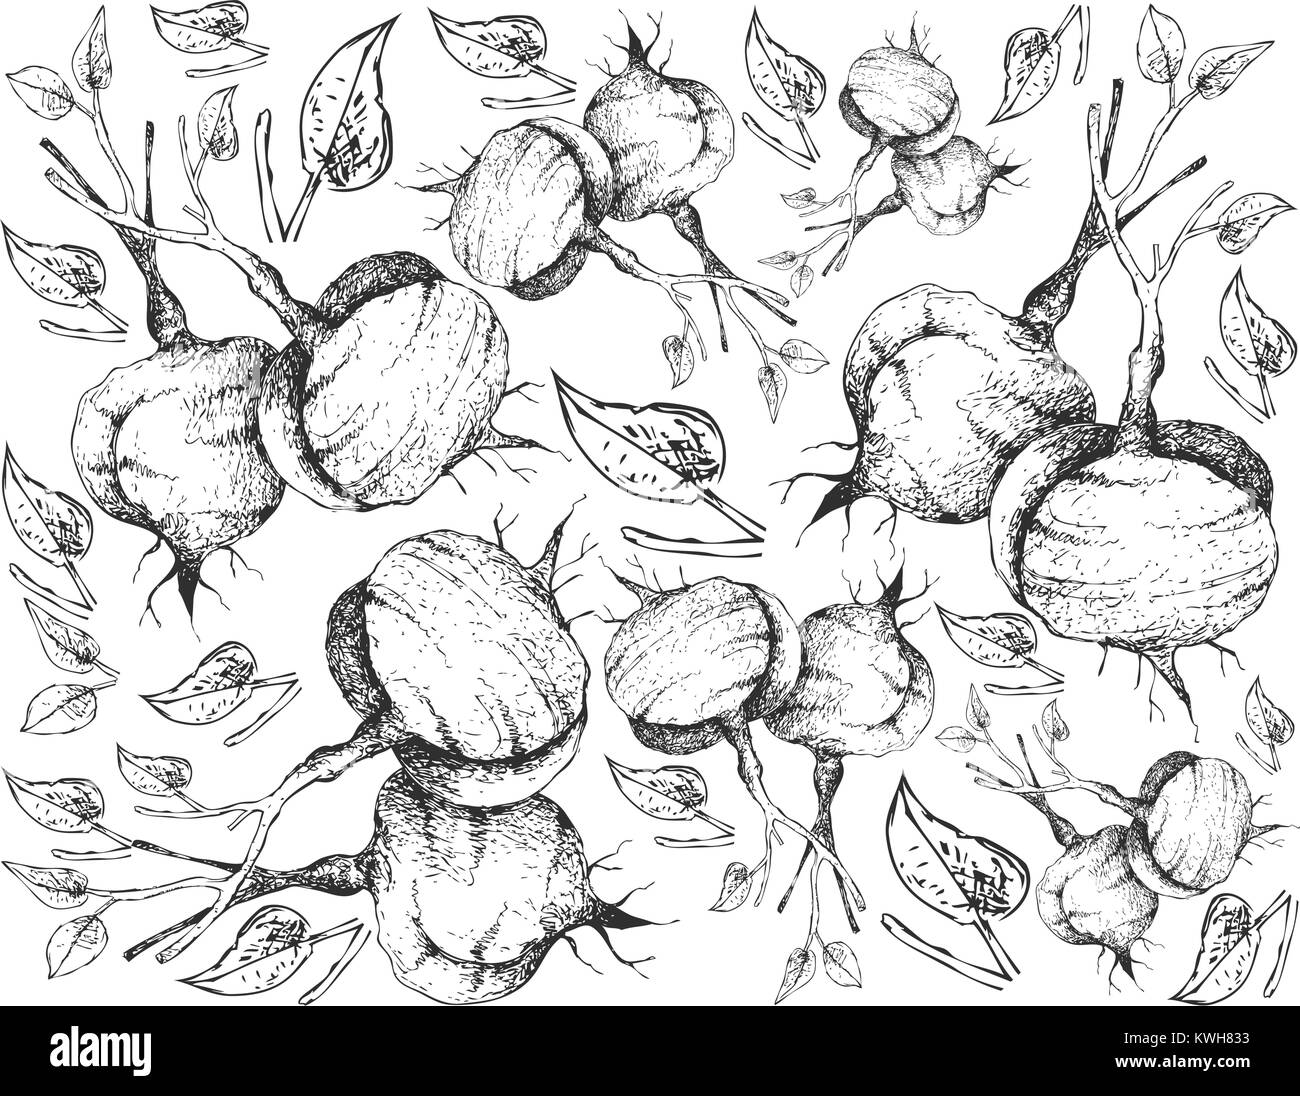 Root and Tuberous Vegetables, Illustration Hand Drawn Sketch of Fresh Jicama, Mexican Yam Bean, Mexican Turnip or Pachyrhizus Erosus Isolated on White Stock Vector